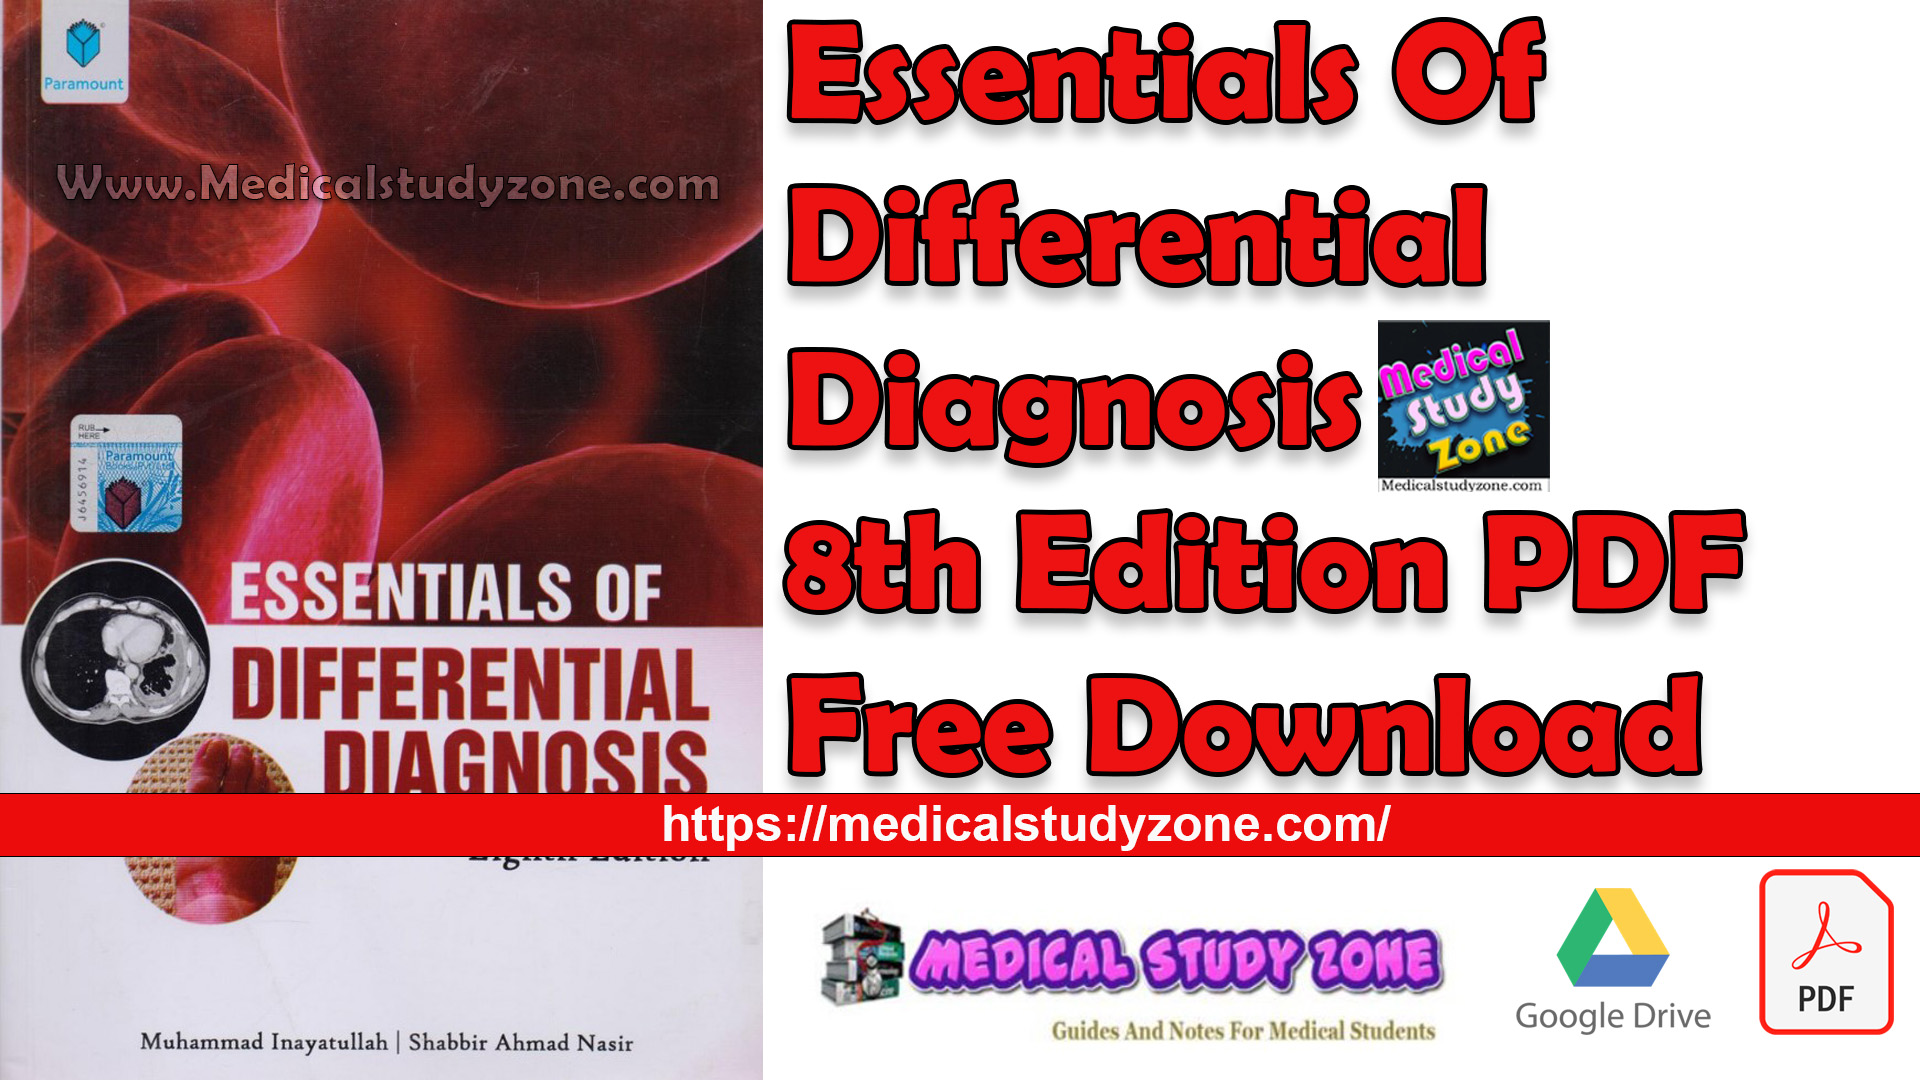 Essentials Of Differential Diagnosis 8th Edition PDF Free Download